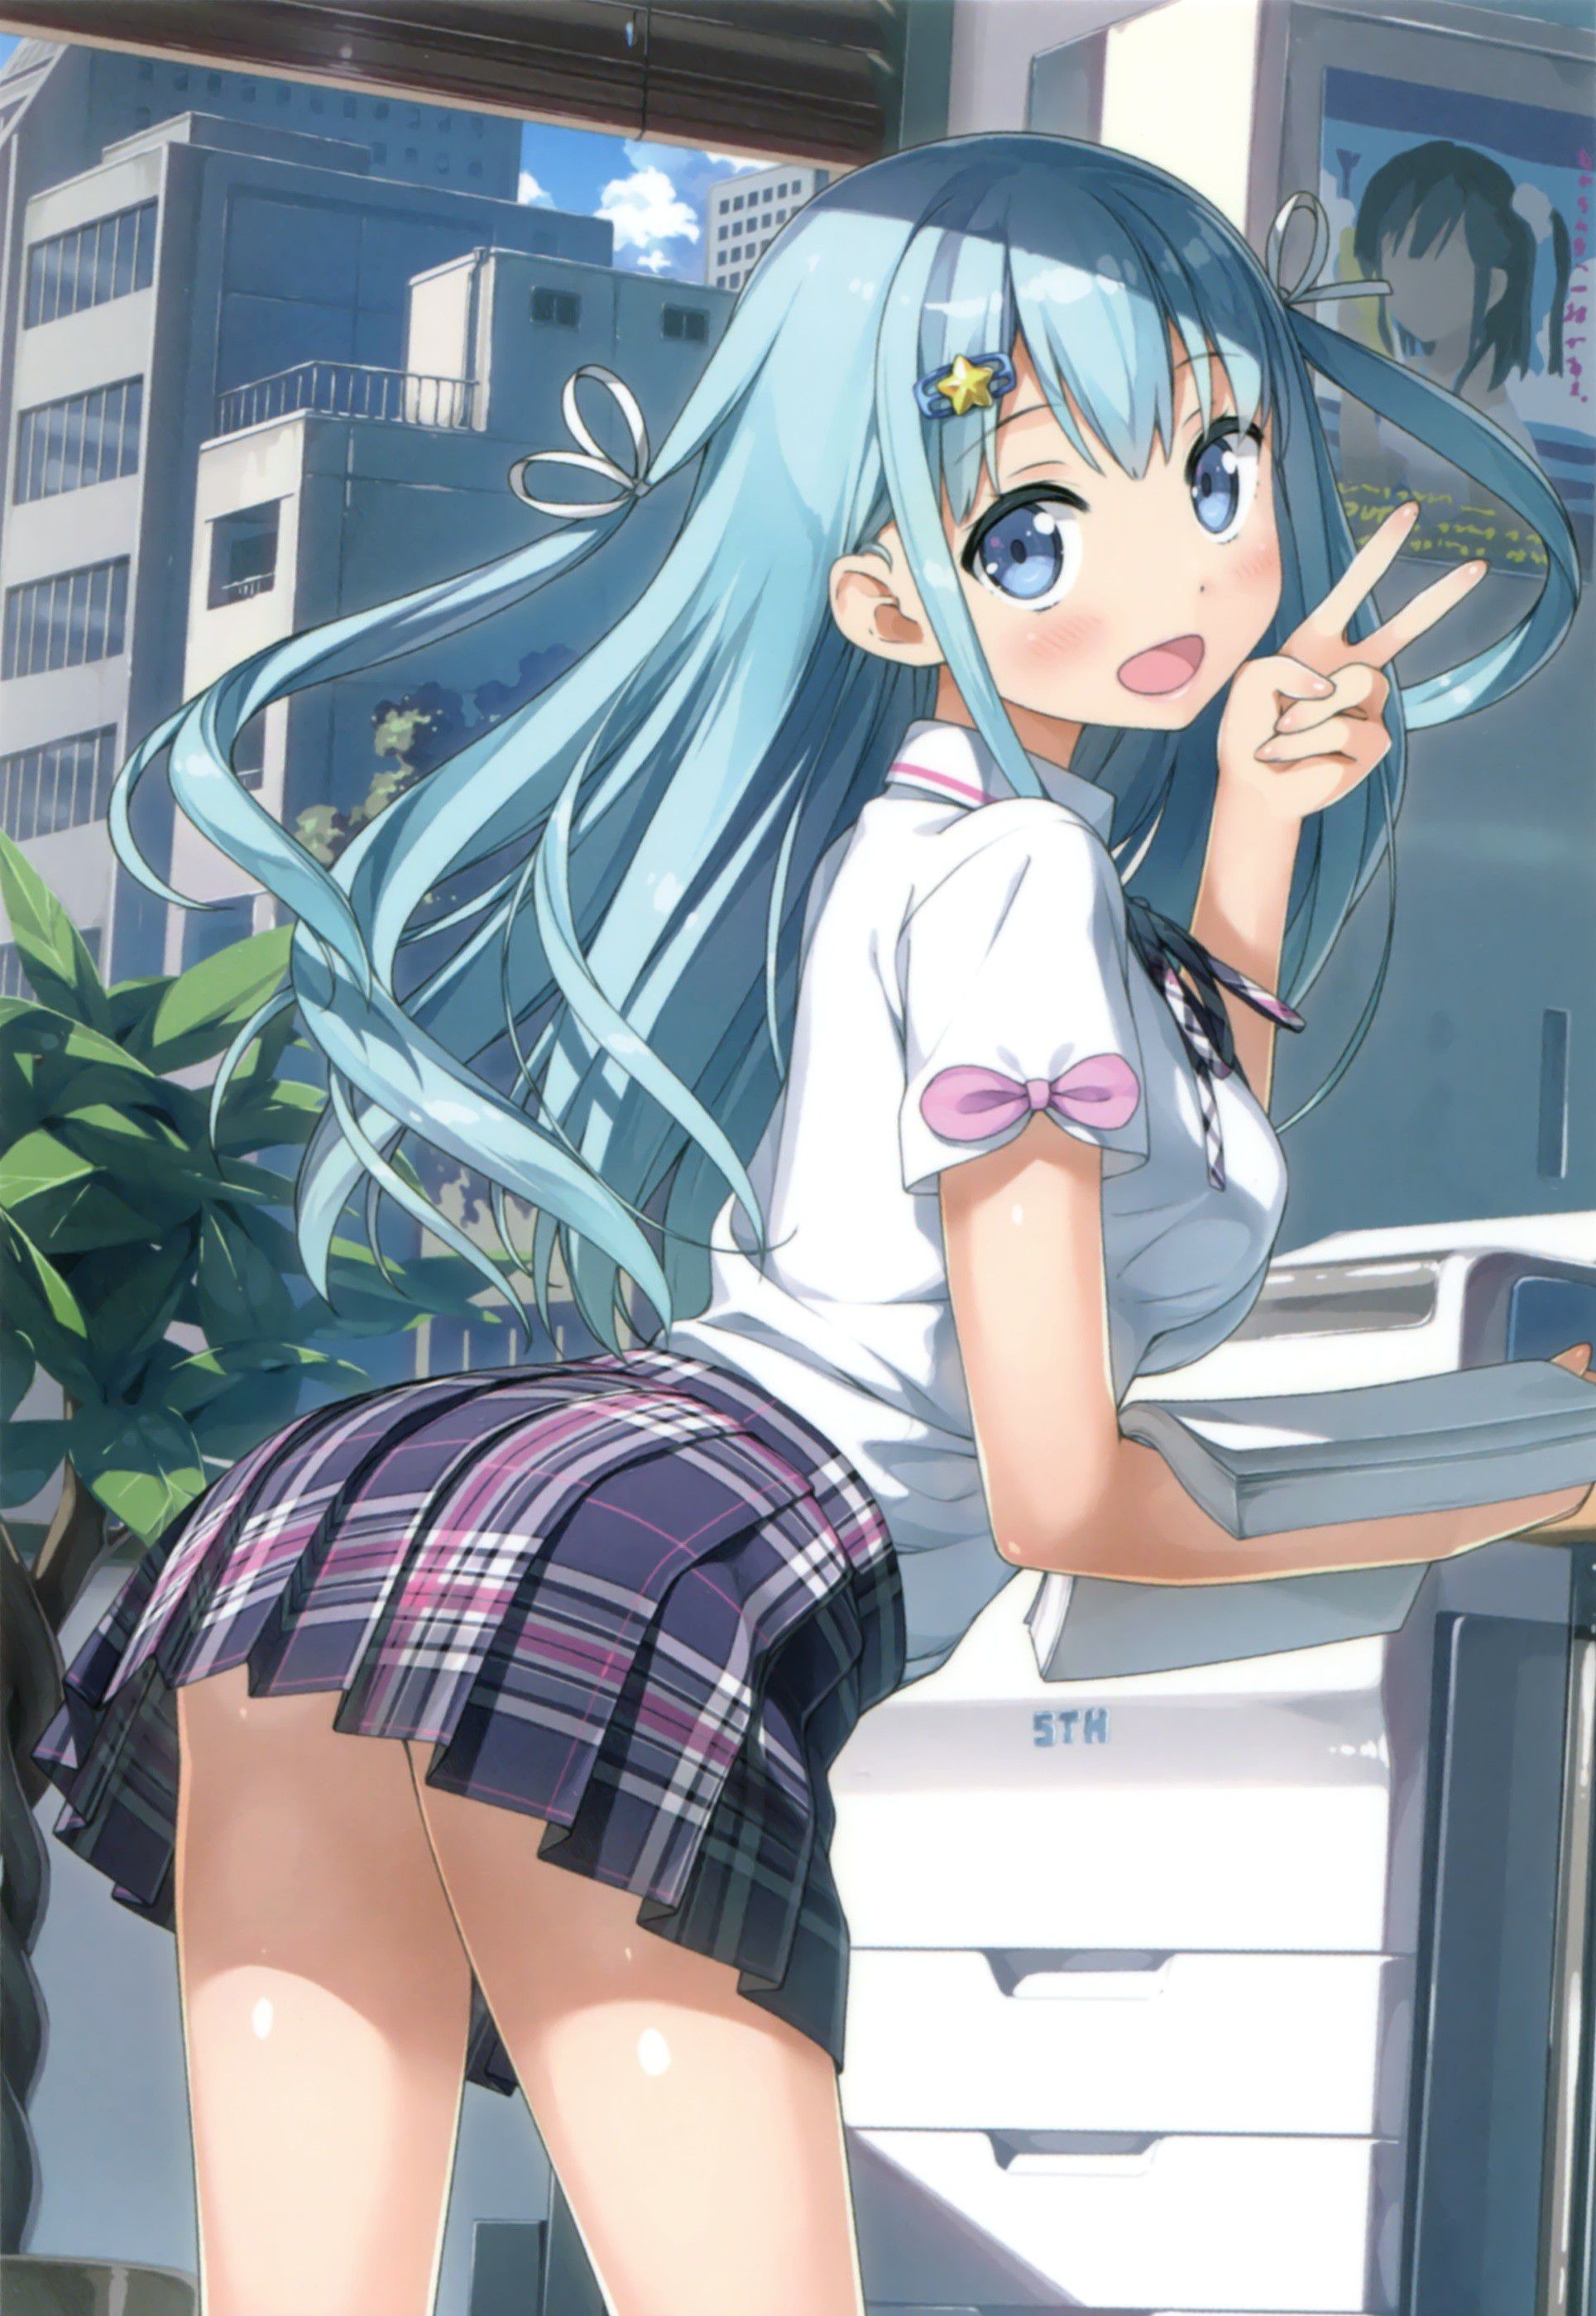 Secondary image of the cute girl that is the peace sign Part 2 [non-erotic] 5